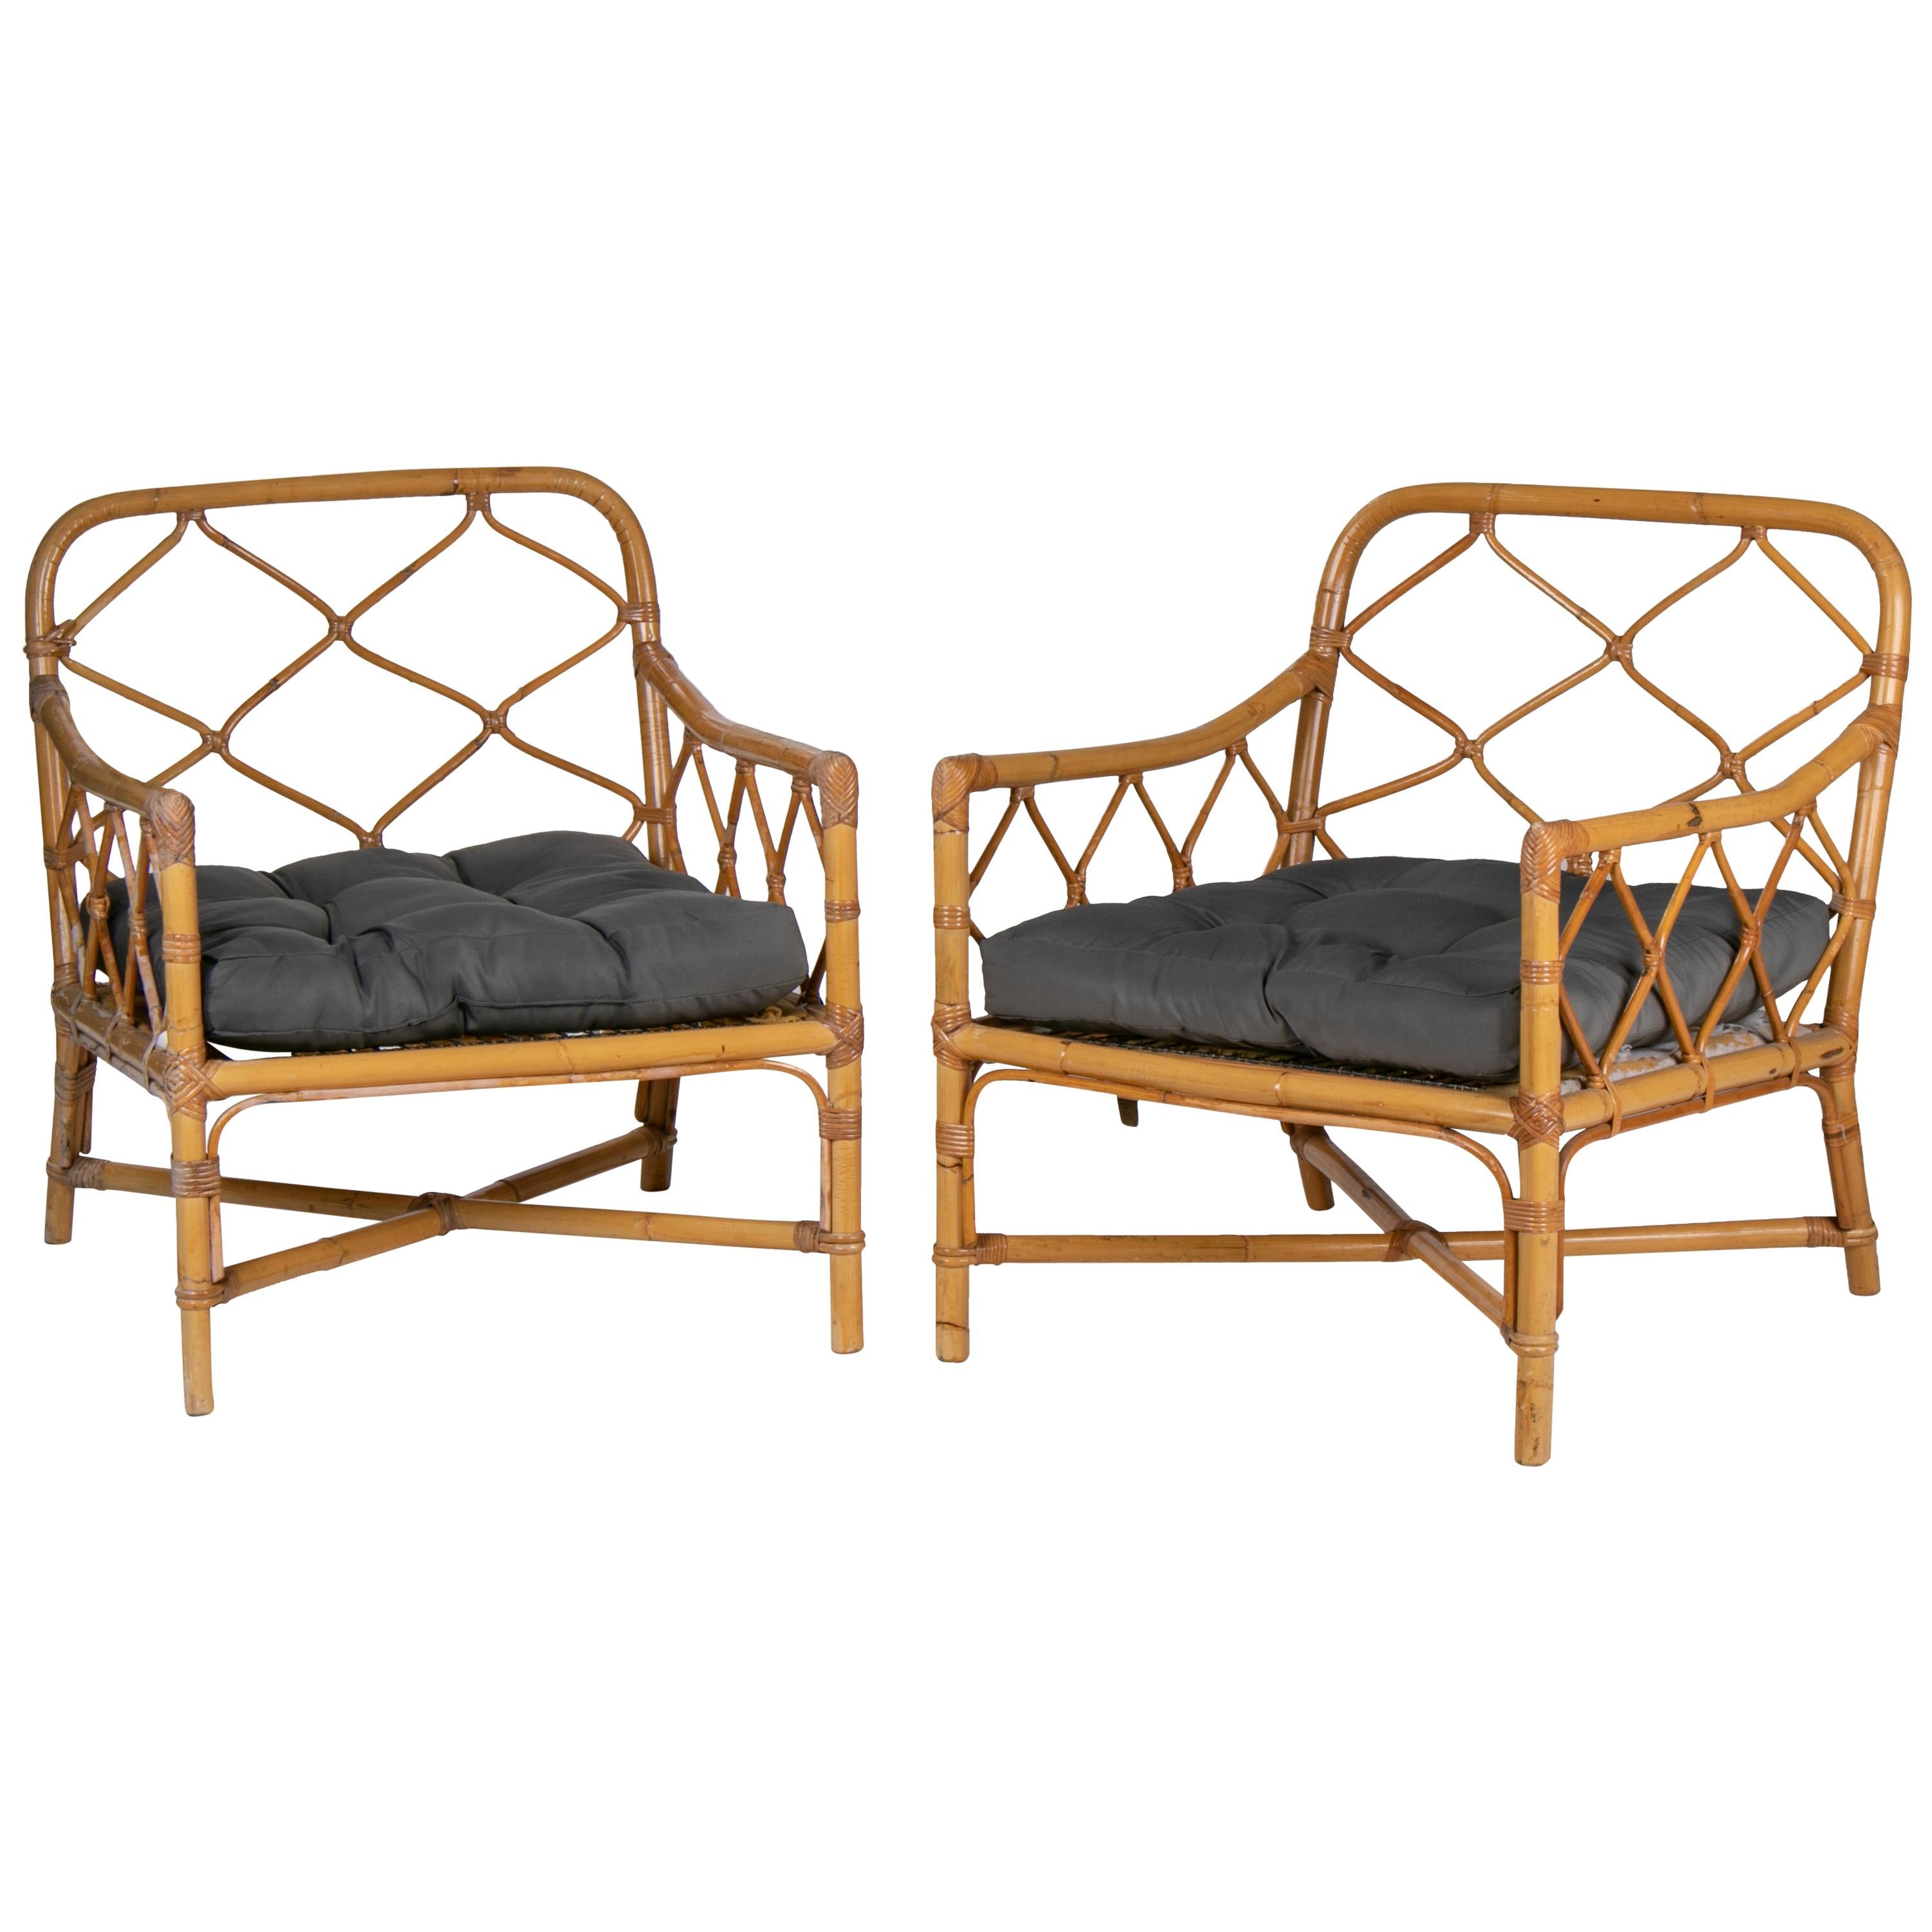 1980s Pair of Bamboo and Canework Armchairs